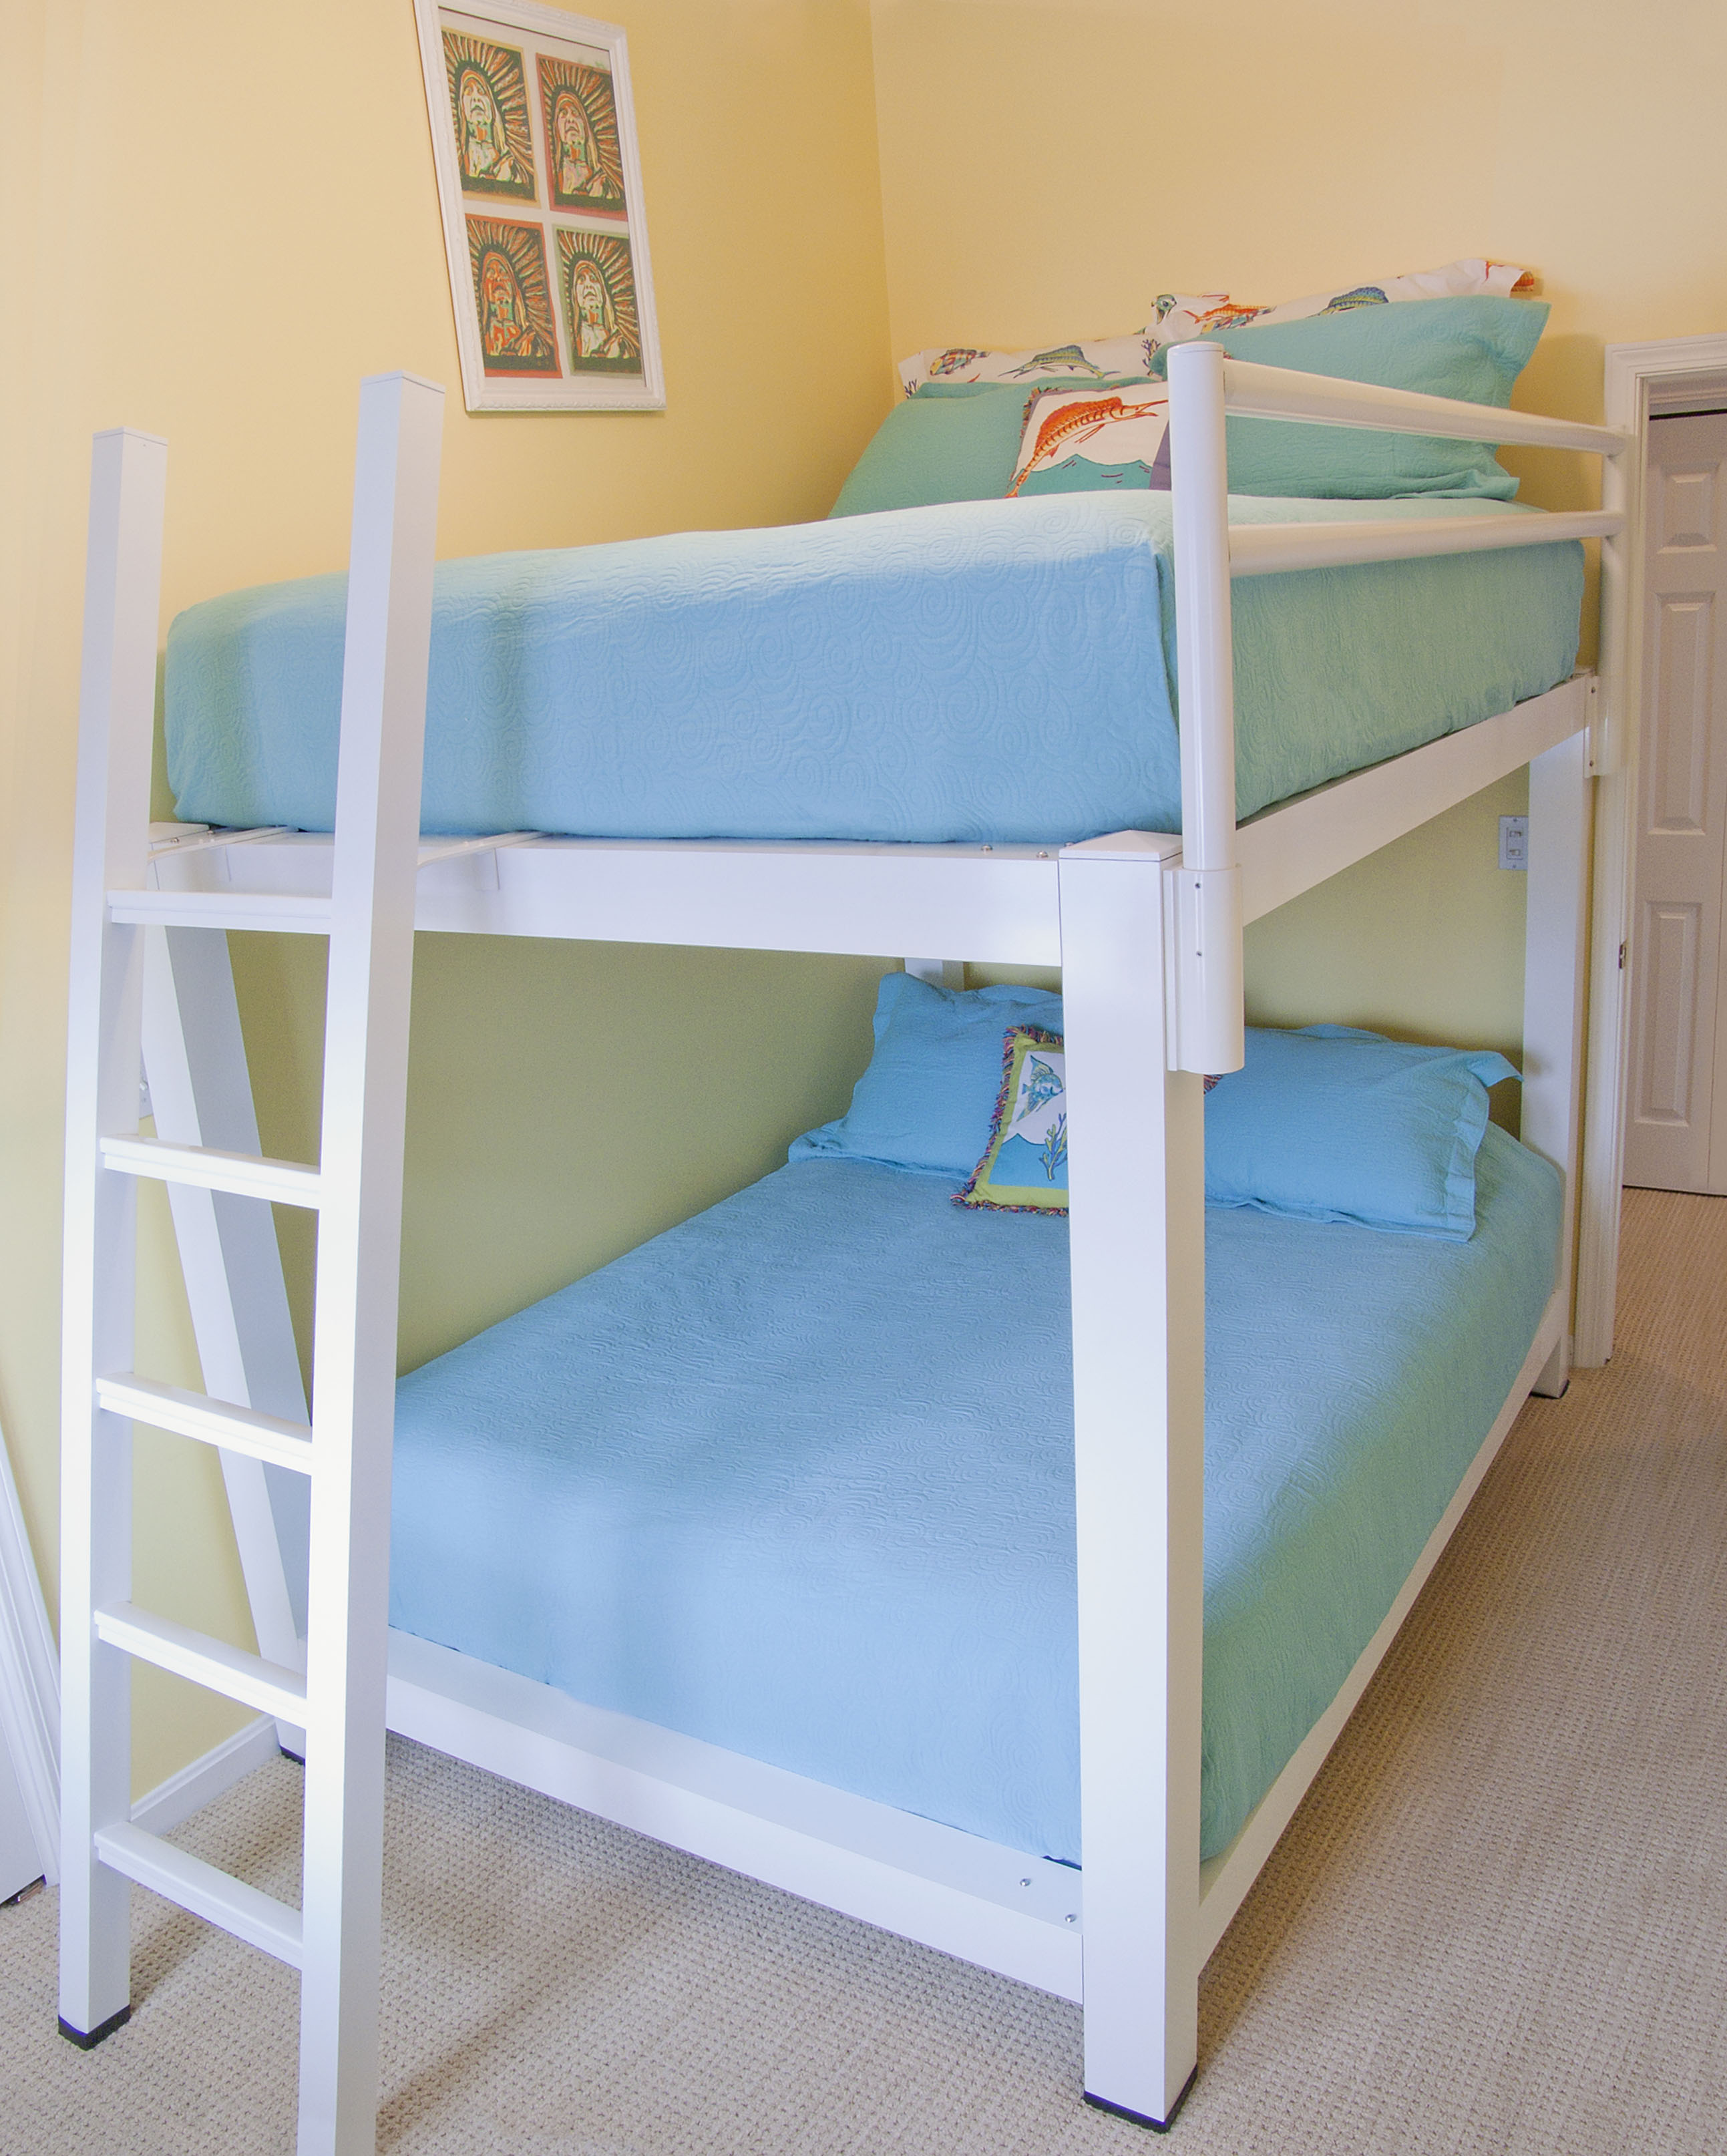 Bunk Beds Sy For Large S, Standard Bunk Bed Weight Limit